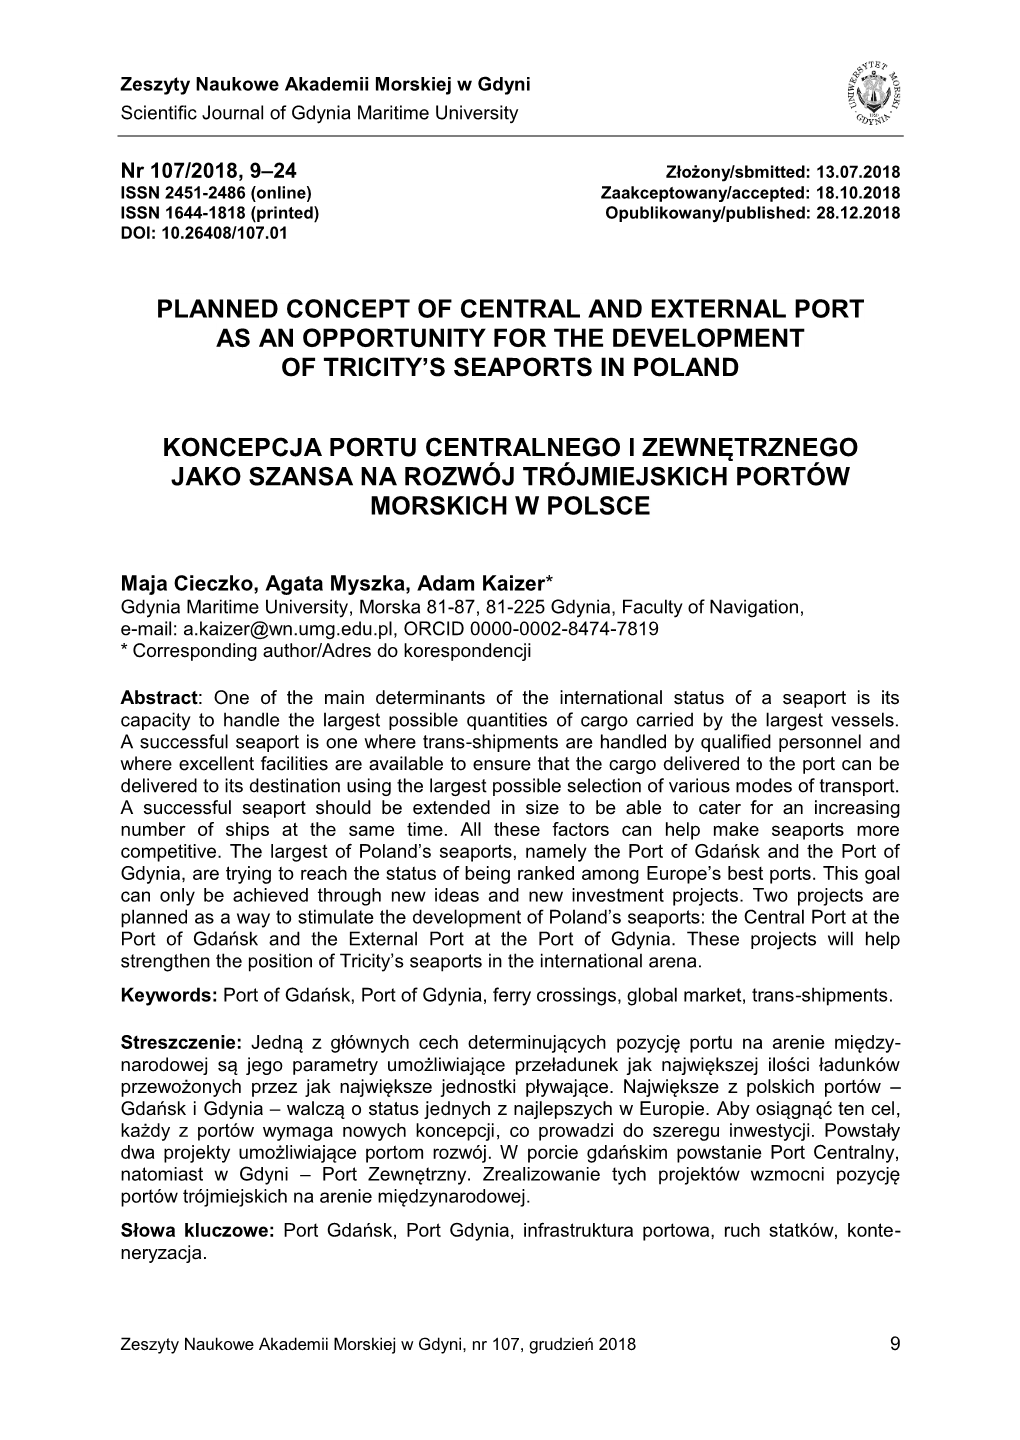 Planned Concept of Central and External Port As an Opportunity for the Development of Tricity’S Seaports in Poland